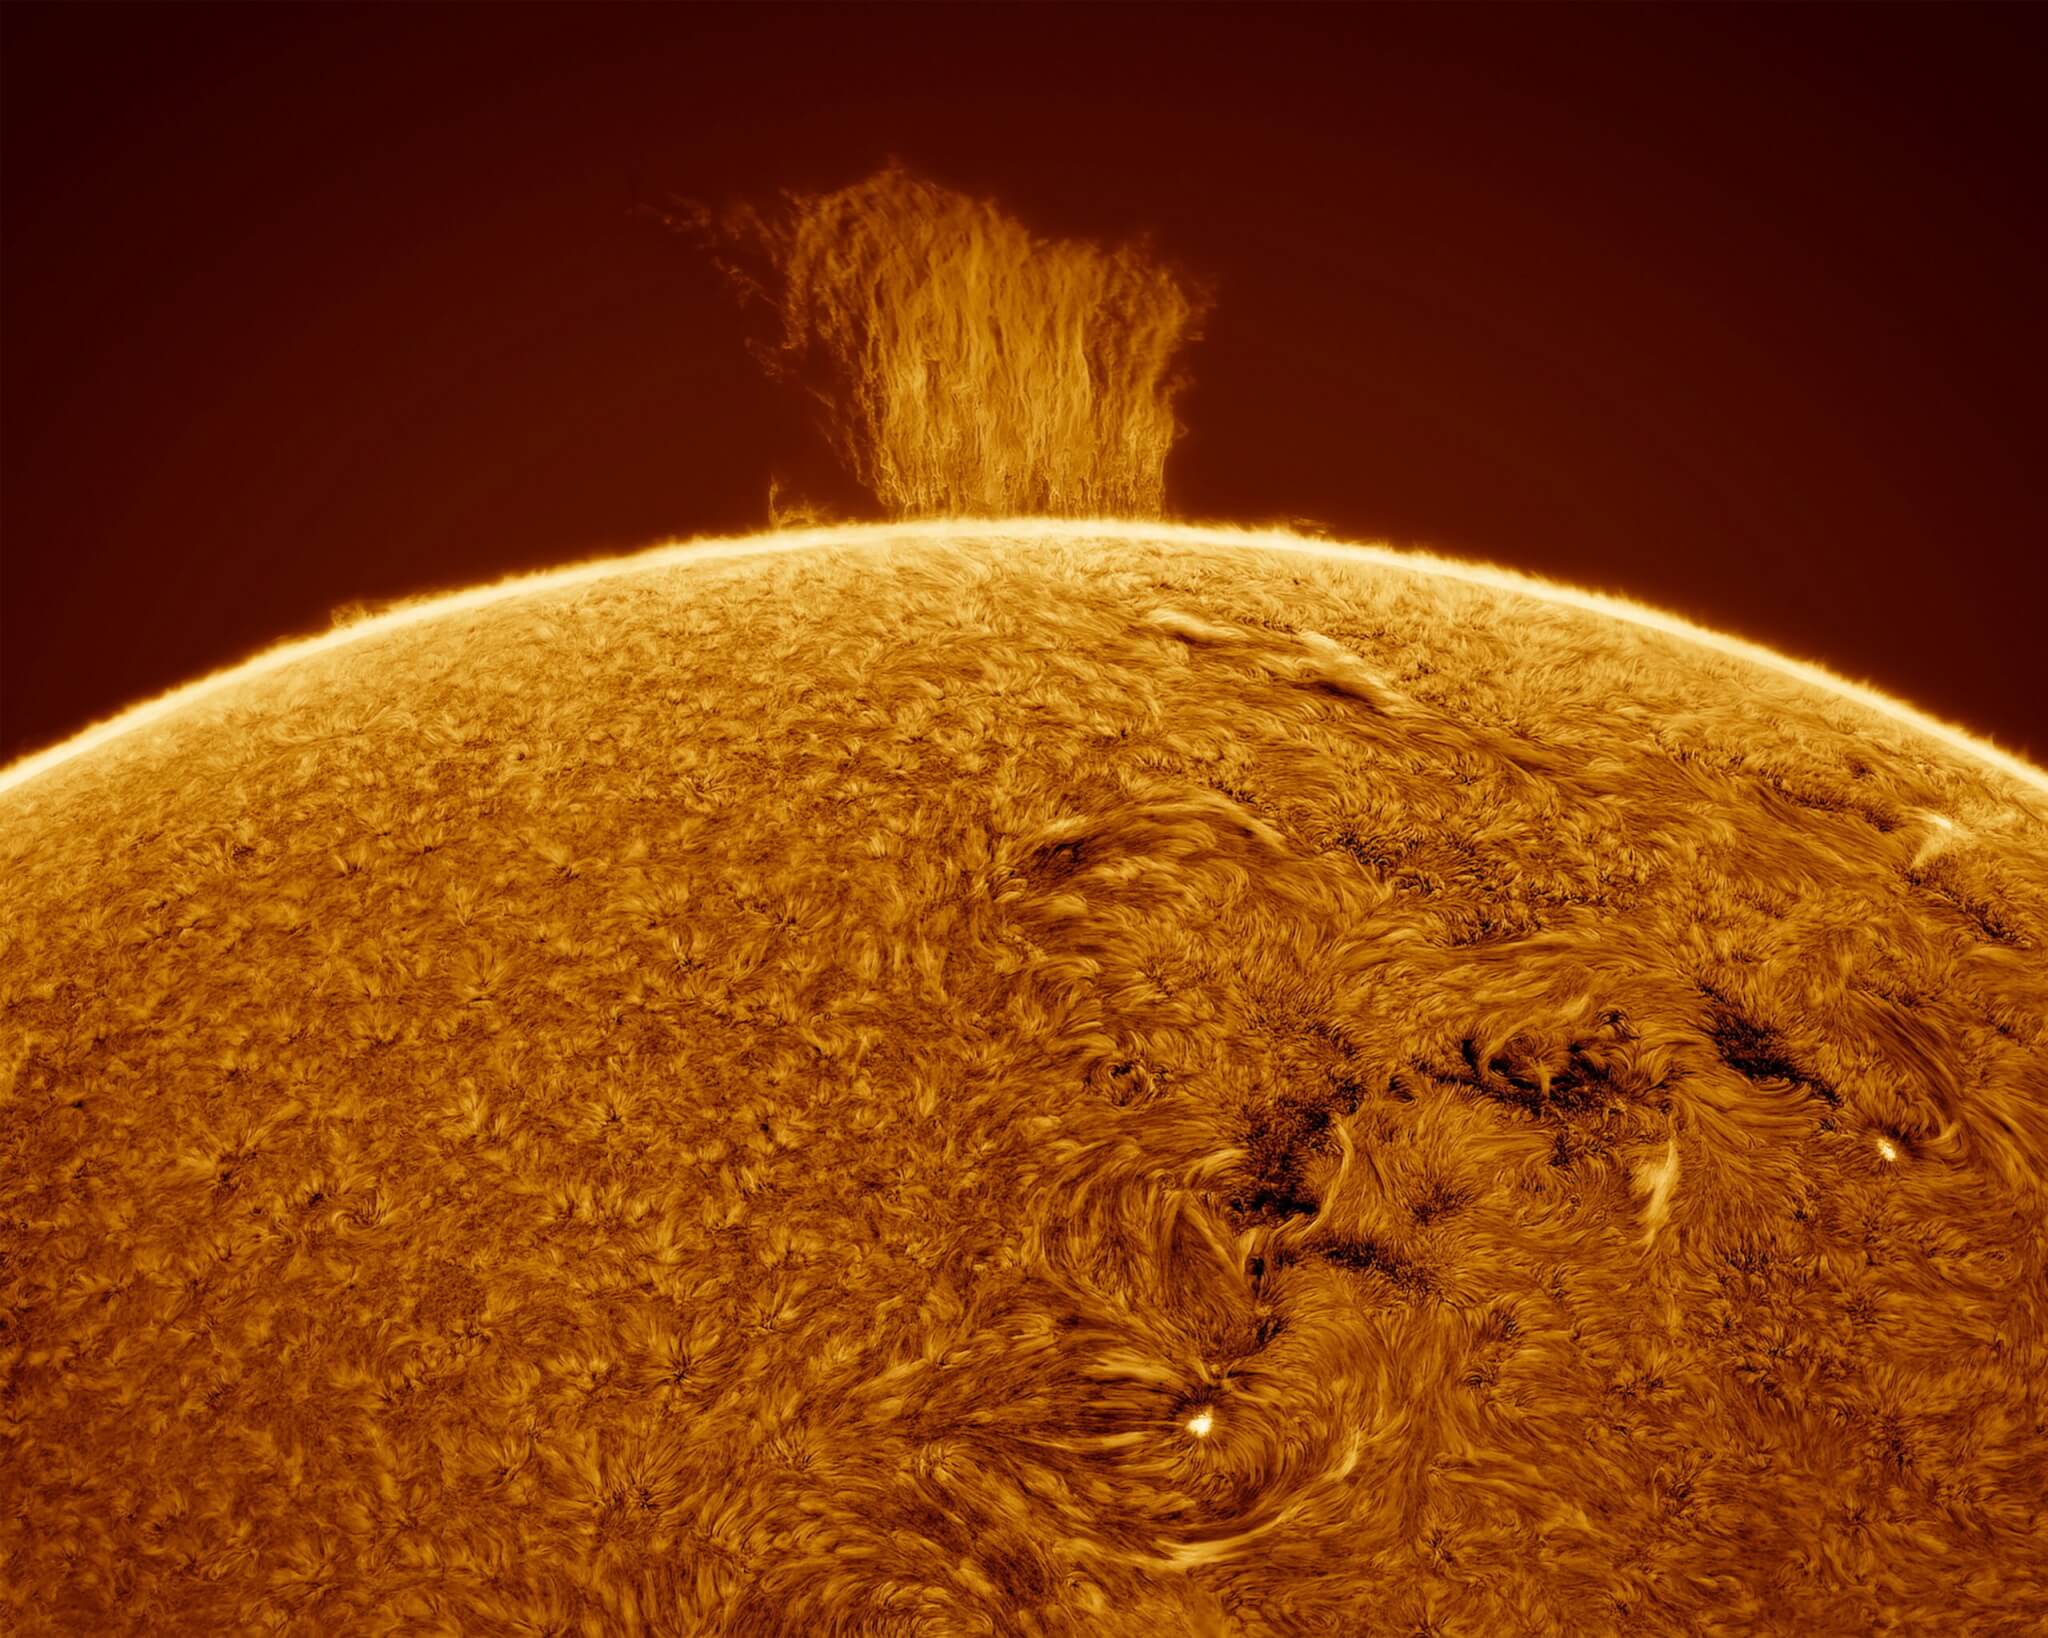 "Wall" of plasma seen stretching above the Sun's surface.